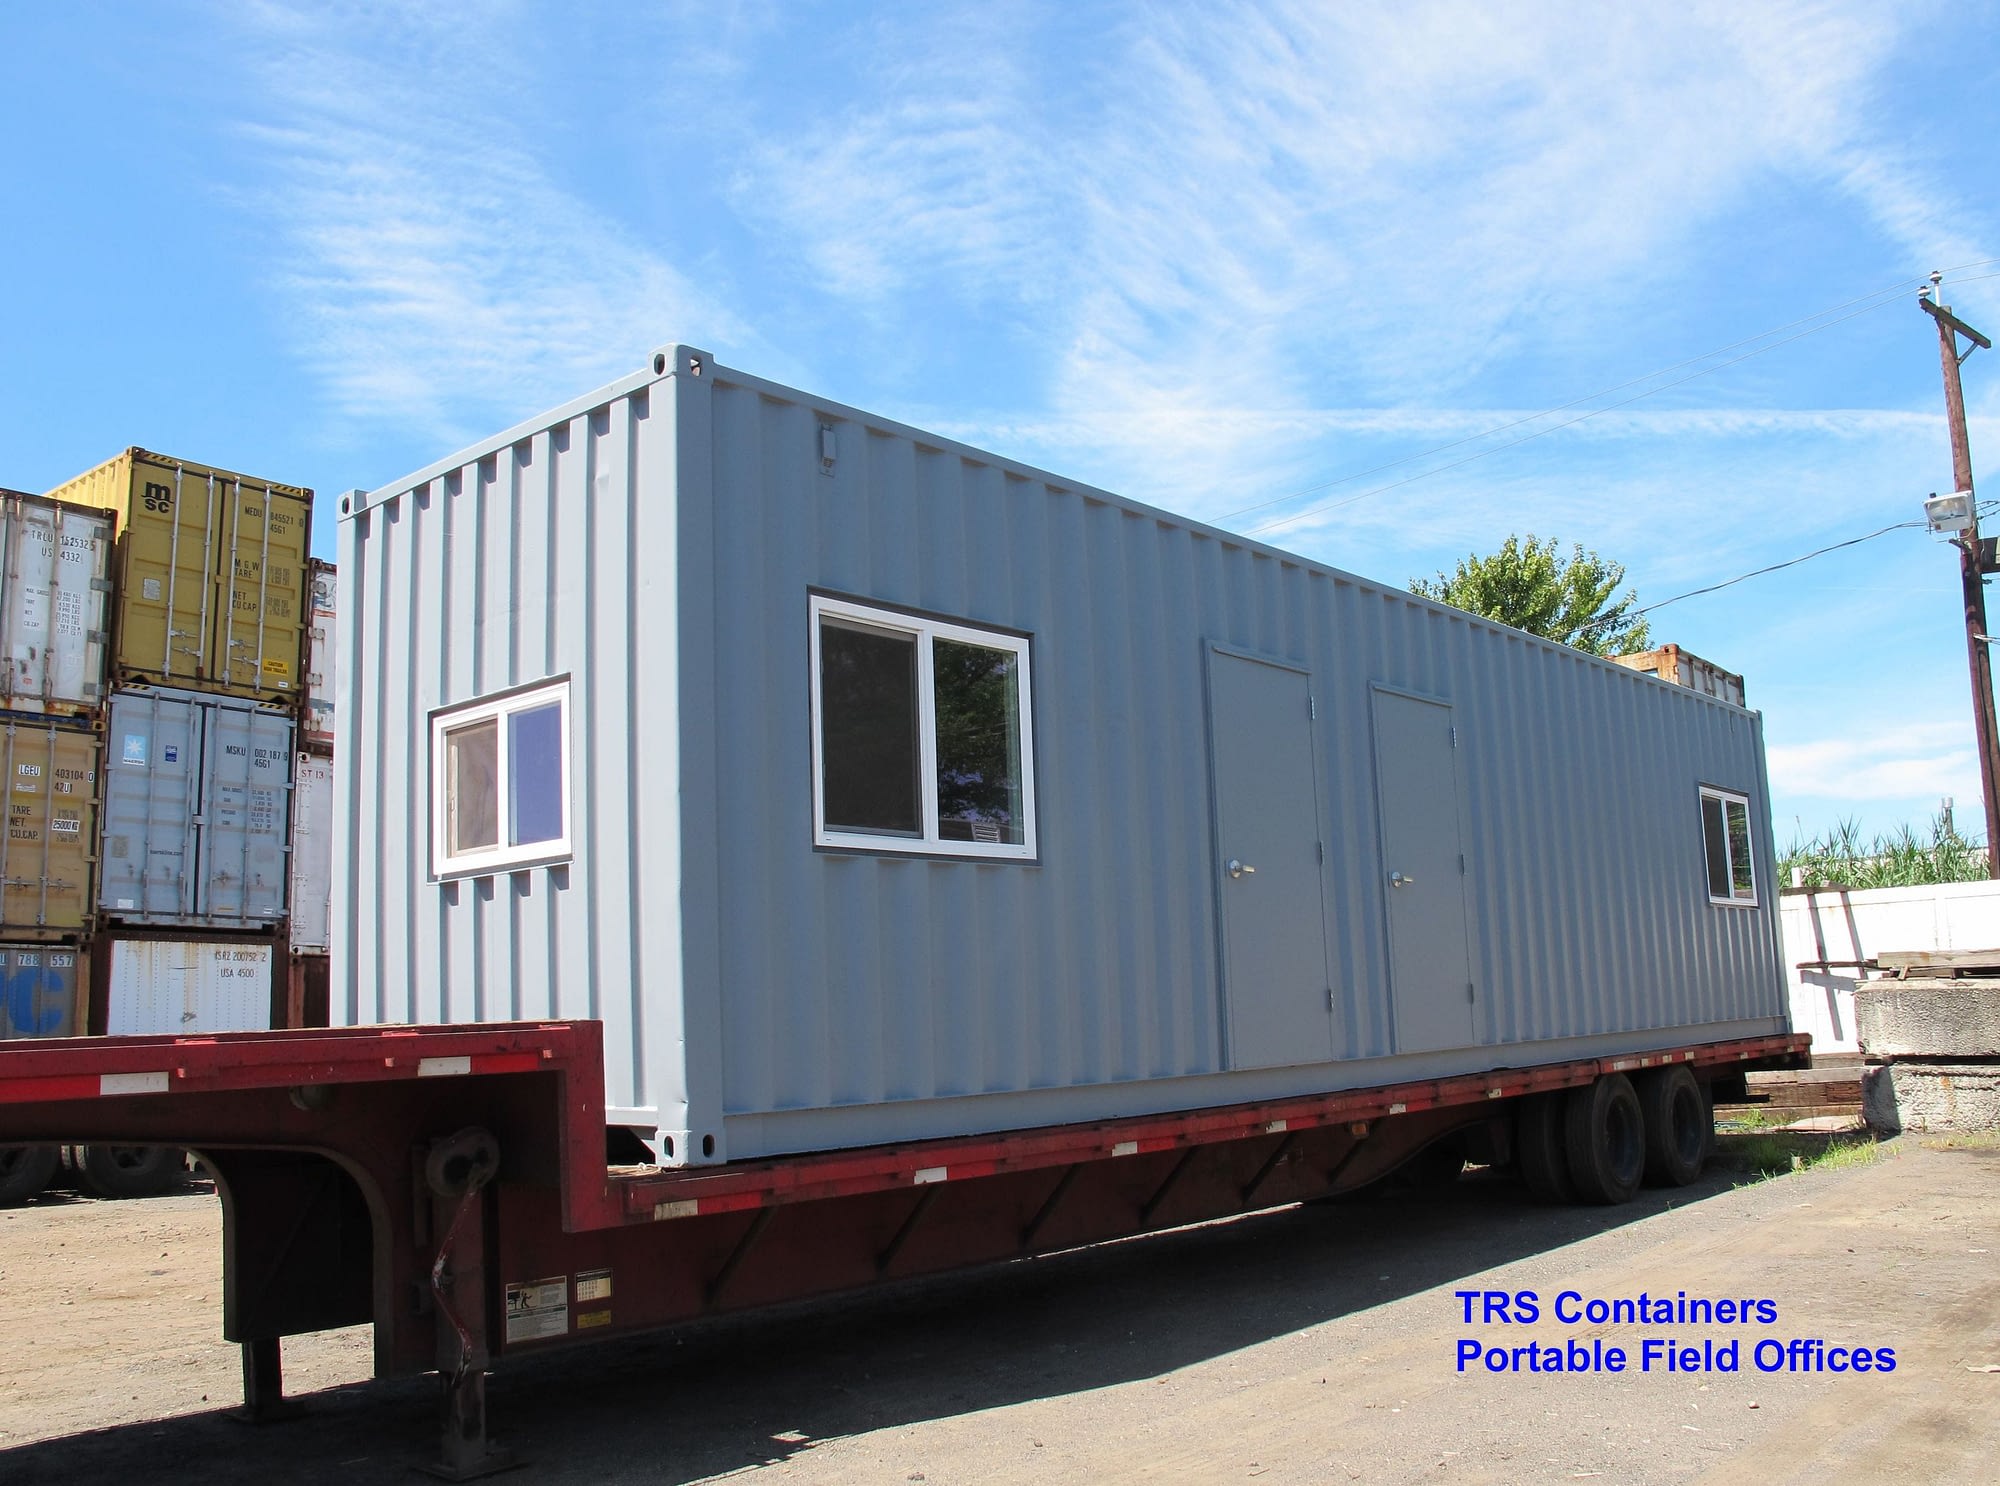 TRS can convert one 40 foot long steel ISO container into multiple private offices